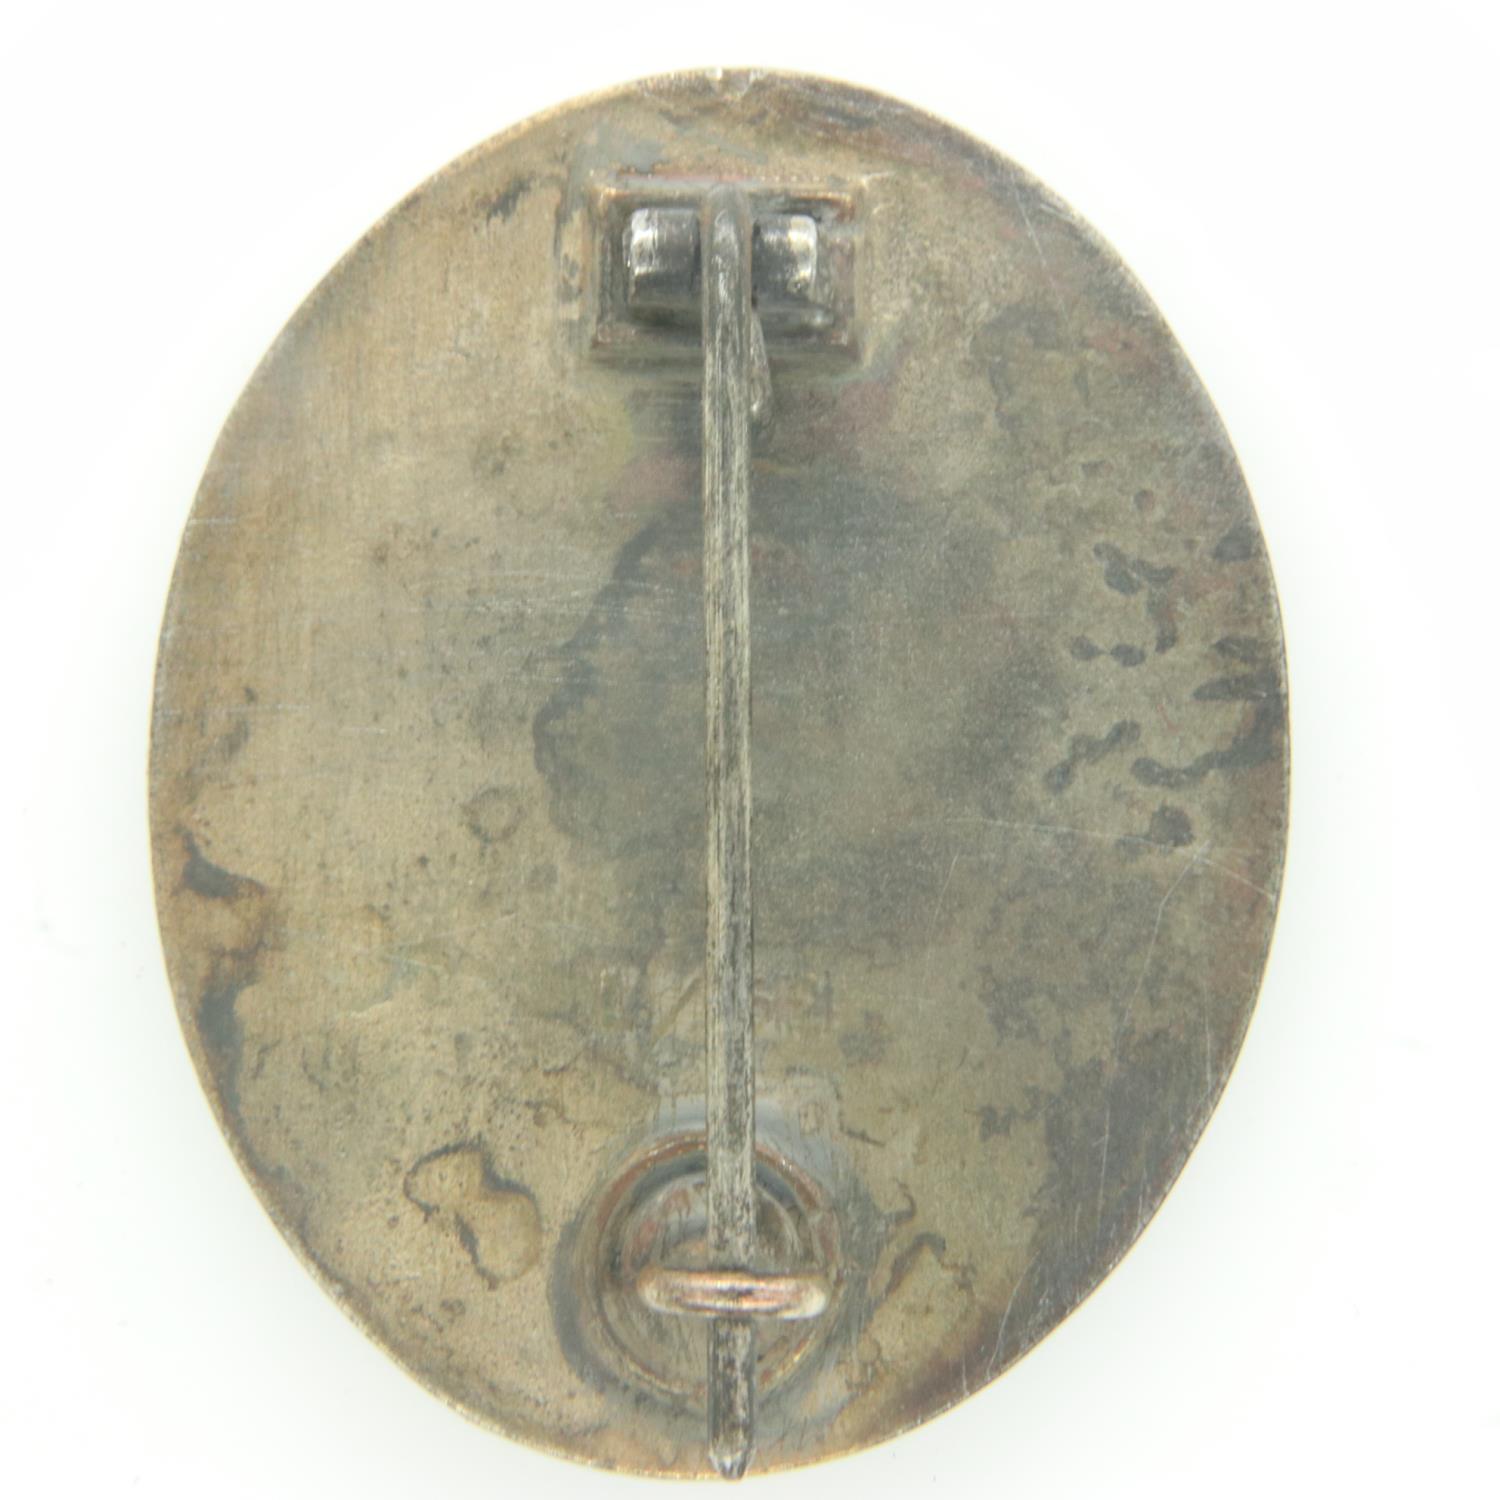 WWII German Silver Wound Badge for being wounded 3 to 4times wounded. Ldo No 56 for the maker - Image 2 of 2